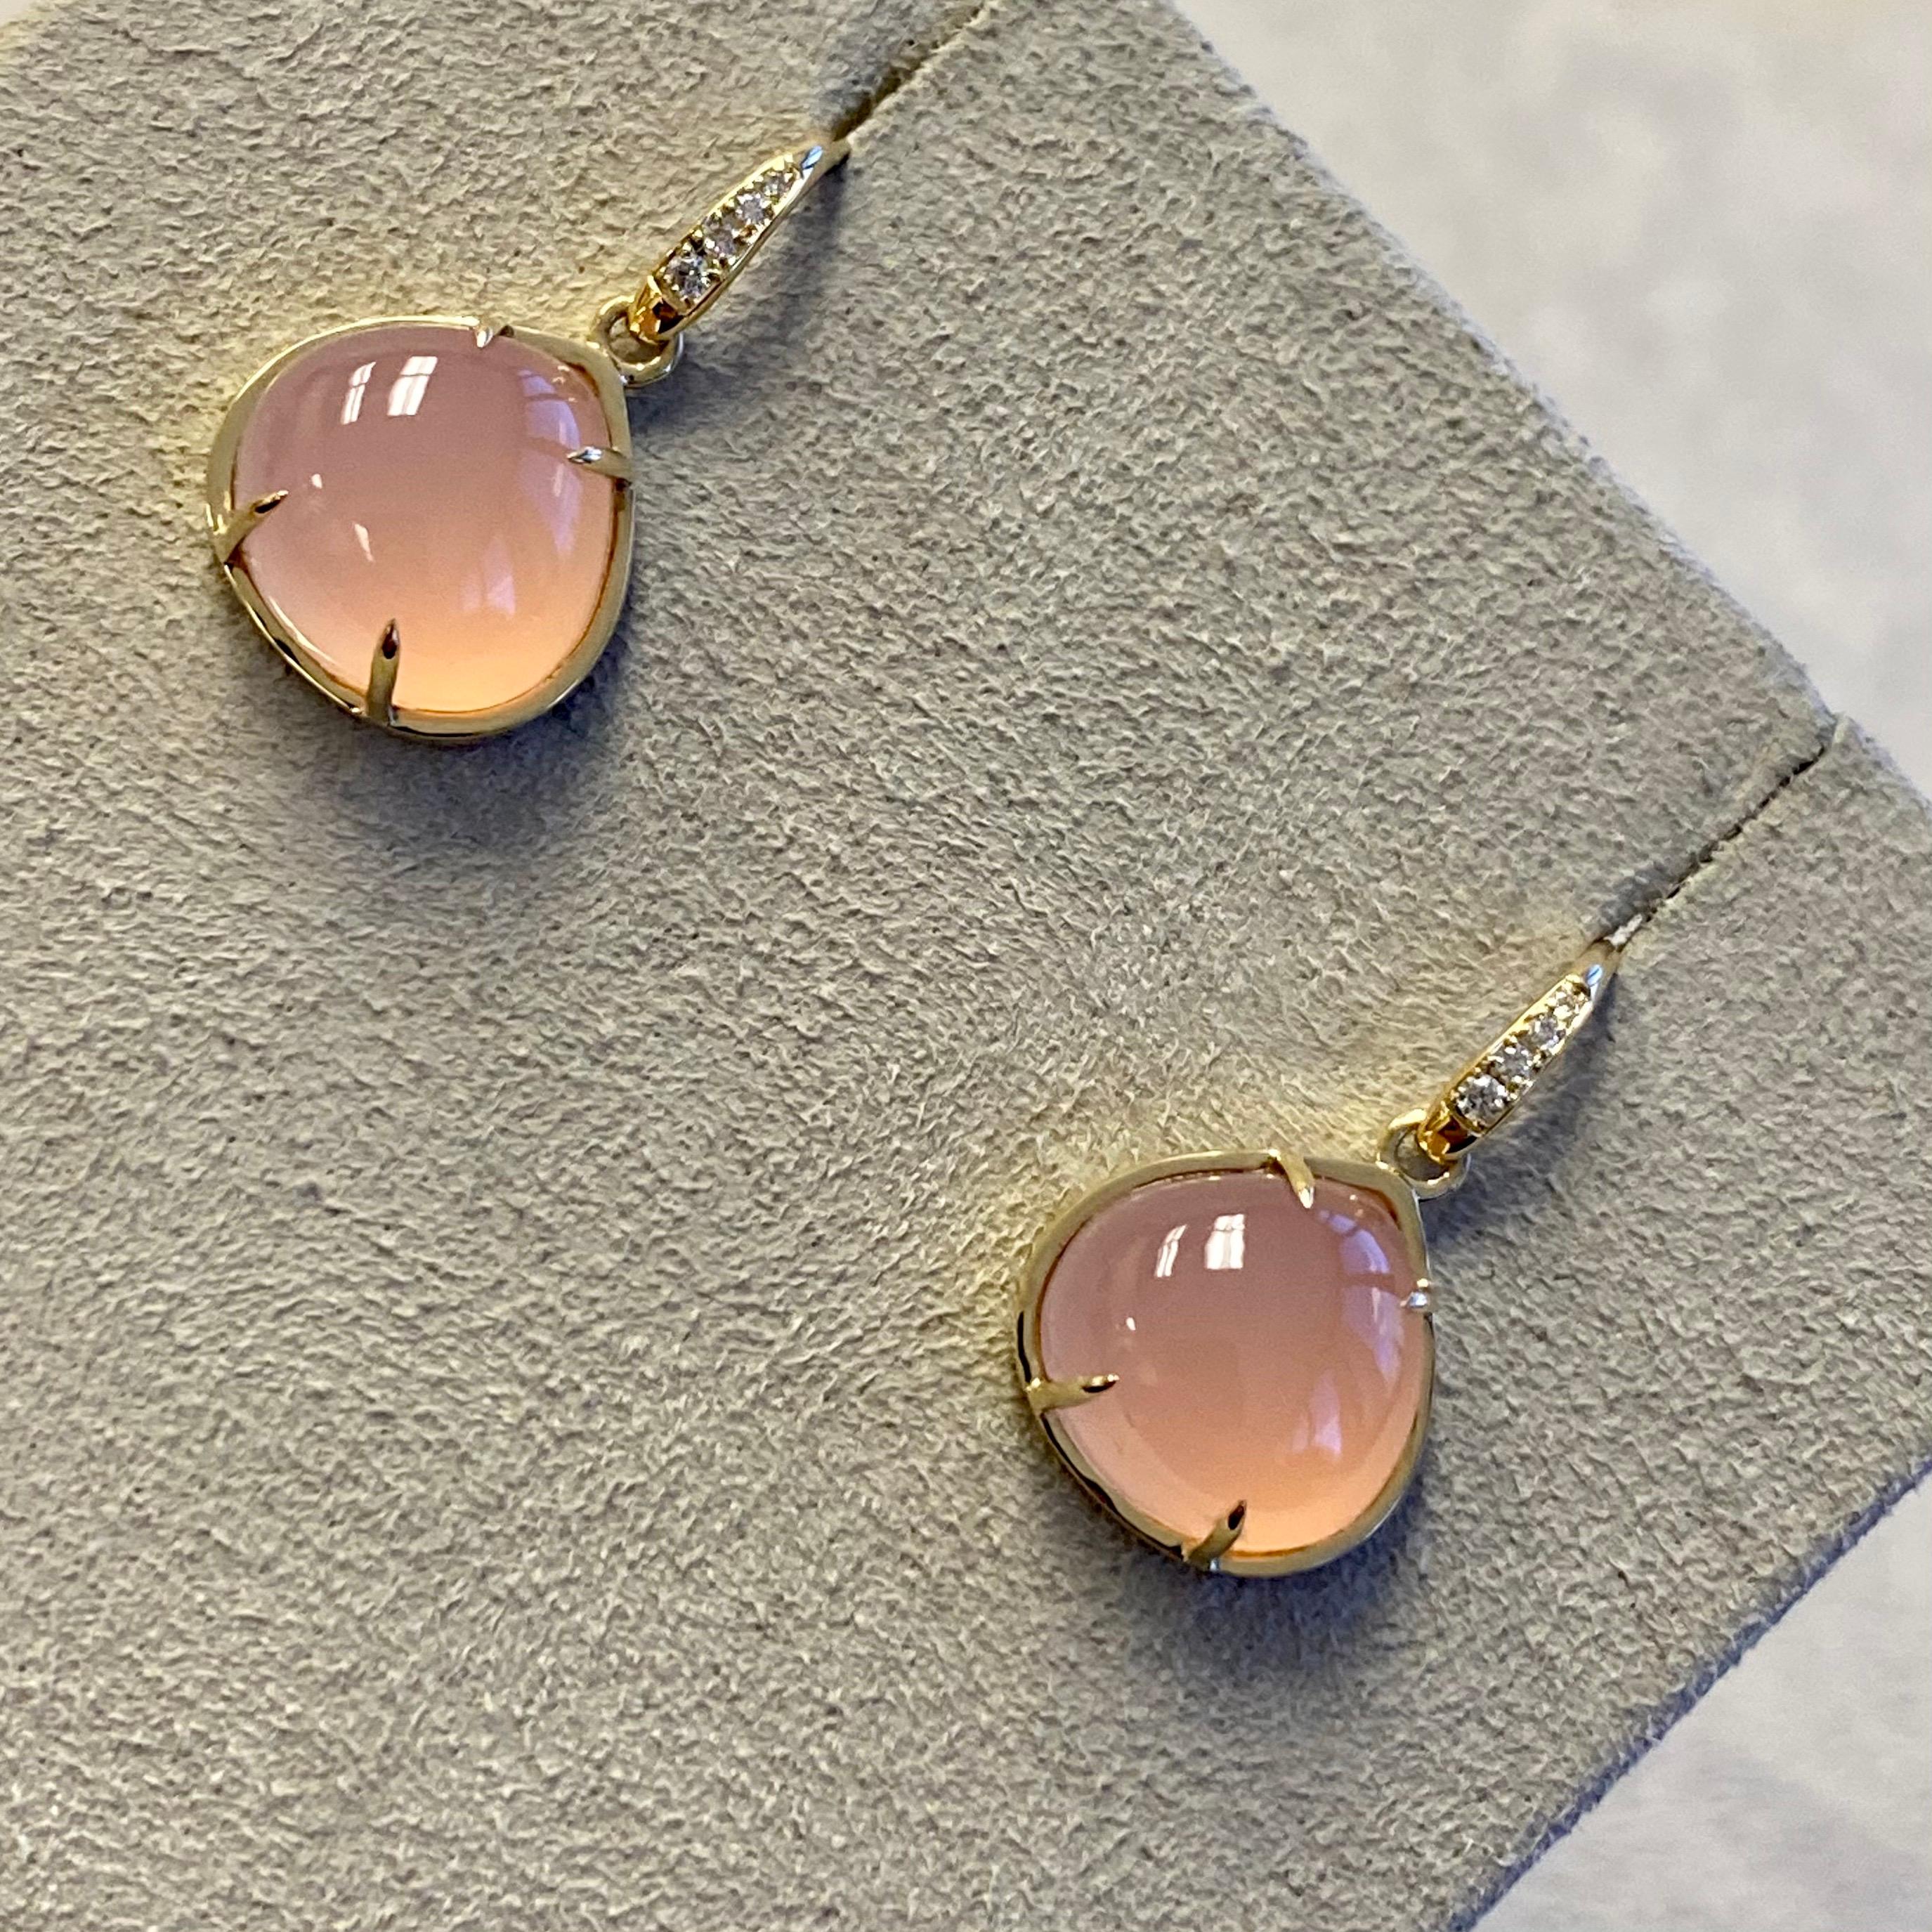 Created in 18kyg
Pink Chalcedony 11 carats approx.
Diamonds 0.05 carat approx.
Limited edition

Crafted from 18-karat yellow gold, these earrings feature a luminous 11-carat pink Chalcedony and a sparkling 0.05-carat diamond accented crown. A